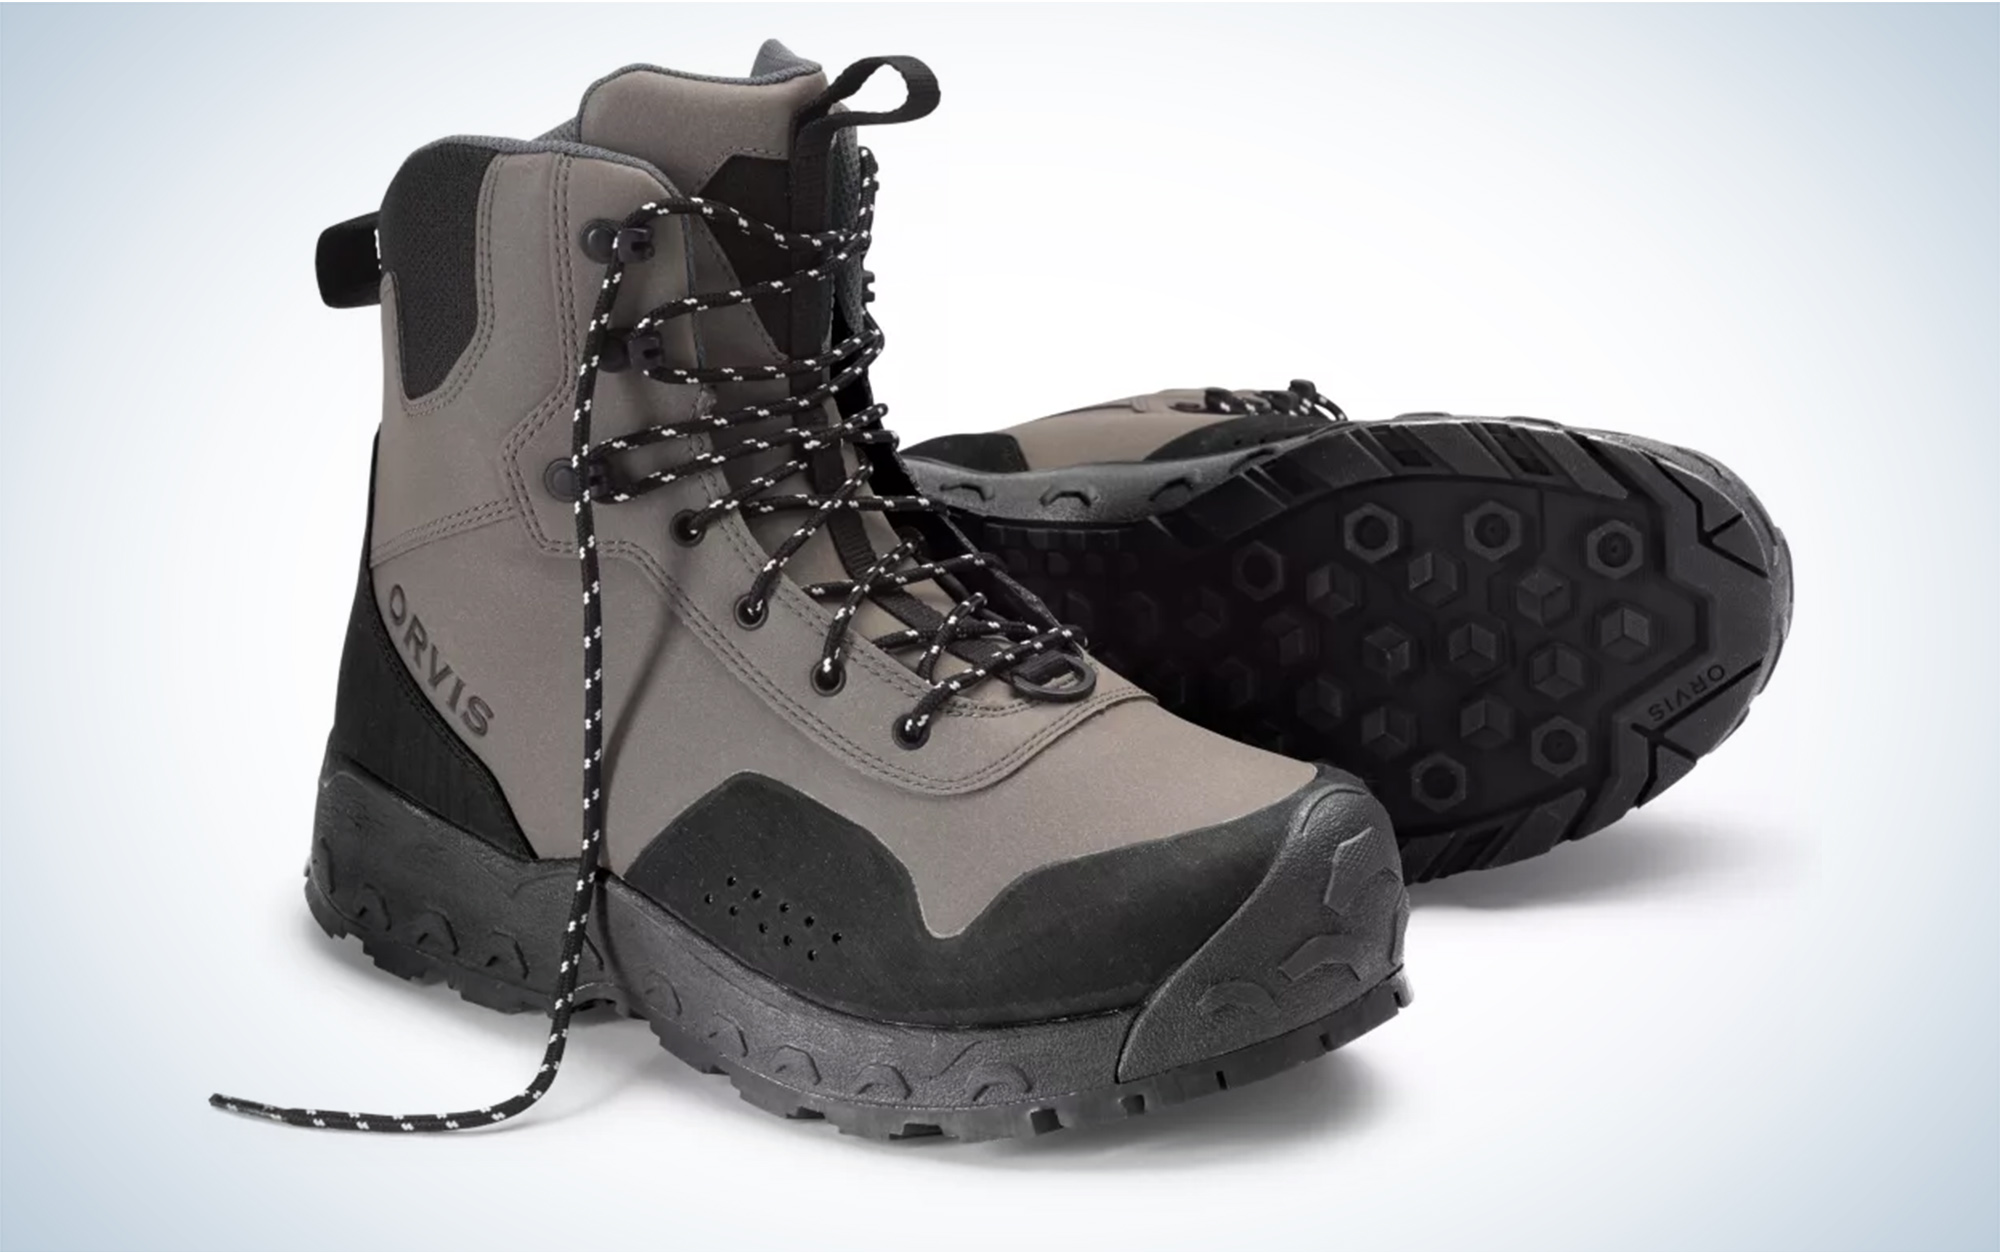 7 Best Wading Boots 2022 - Rubber and Studded Wading Boots for Fishing